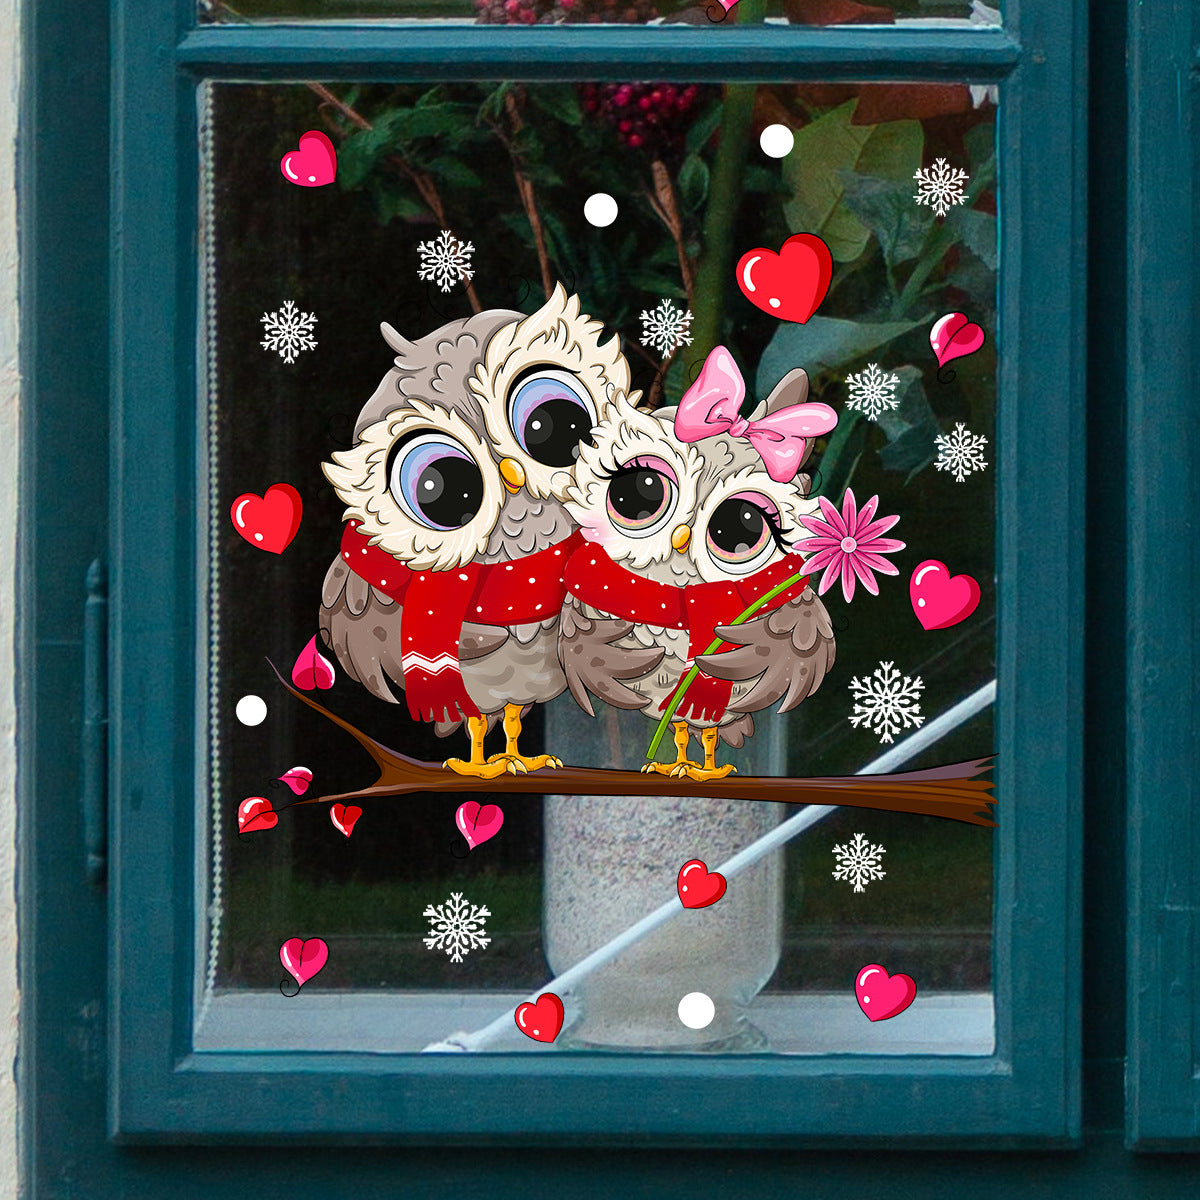 Cartoon Branch Owl Static Sticker Glass Window Home Decoration Wall Sticker, Valentine's Day decor, Romantic home accents, Heart-themed decorations, Cupid-inspired ornaments, Love-themed party supplies, Red and pink decor, Valentine's Day table settings, Romantic ambiance accessories, Heart-shaped embellishments, Valentine's Day home embellishments